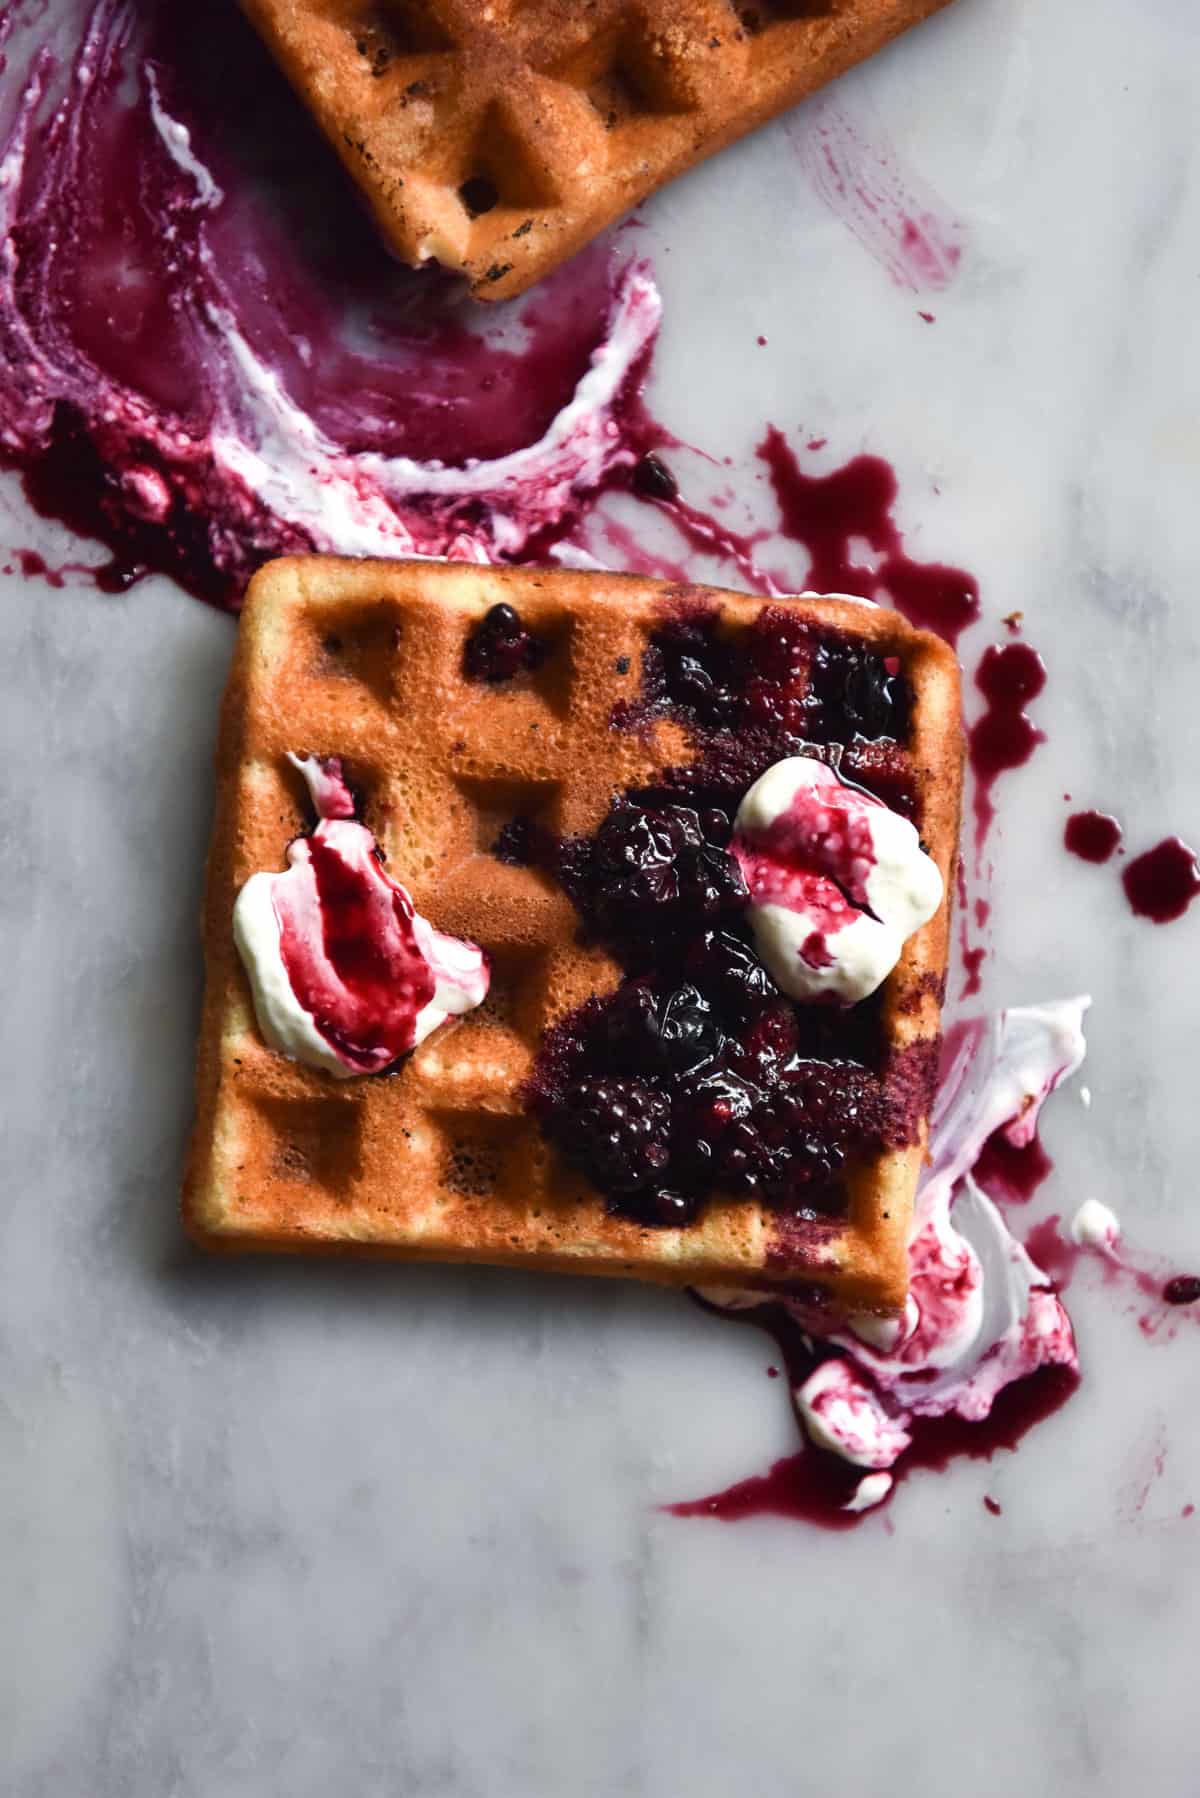 An aerial image of a gluten free waffle atop a white marble table. The waffle is golden brown and topped with yoghurt and a berry compote which creates a beautiful marbled pattern over the waffle and the table.